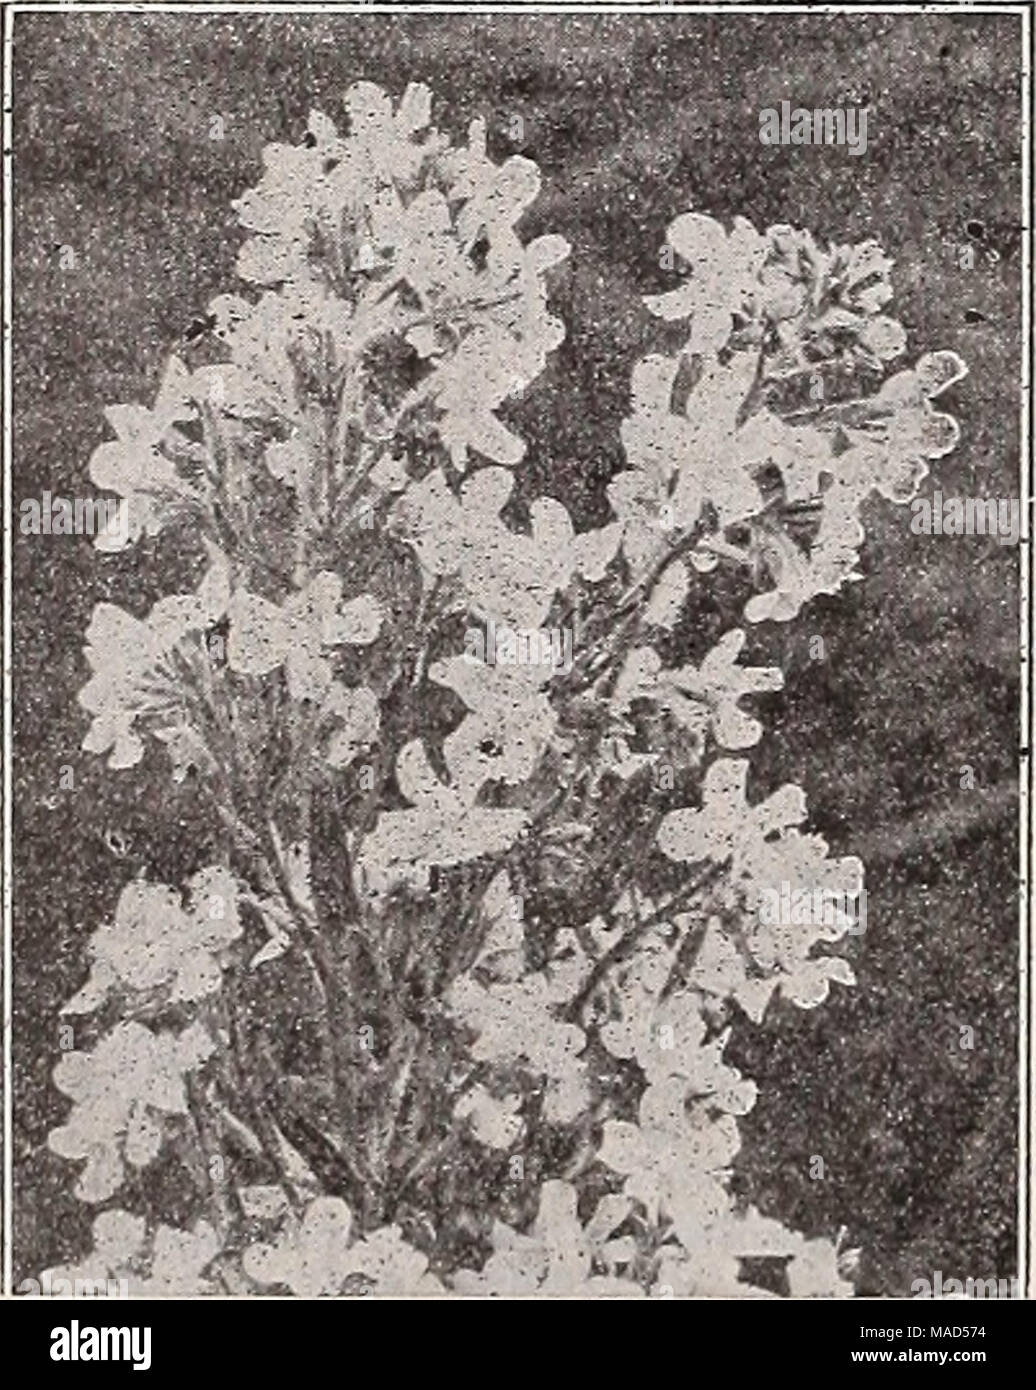 . Dreer's wholesale catalog for florists : winter - spring - summer 1938 . Anchusa Itallca, Dropmore Variety AnchusaâAlkanet, Bugloss Itallca, Dropmore Variety. Grows 3 to 5 feet high. Bears during May and June In abundance flowers of the richest Gentian blue. Trade pkt. 15c; oz. 50c. Itallca Ziissadell, An Improved form of the Dropmore variety. Of strong, vigorous growth, about 6 feet high. Showy sprays of extra large, clear Gentian blue flowers. Trade pkt. 15o; oz. 60o; % lb. $2.00. Anchusa myosotidiflora A distinct dwarf species, 10 inches high, pro- ducing during April and May sprays of Fo Stock Photo